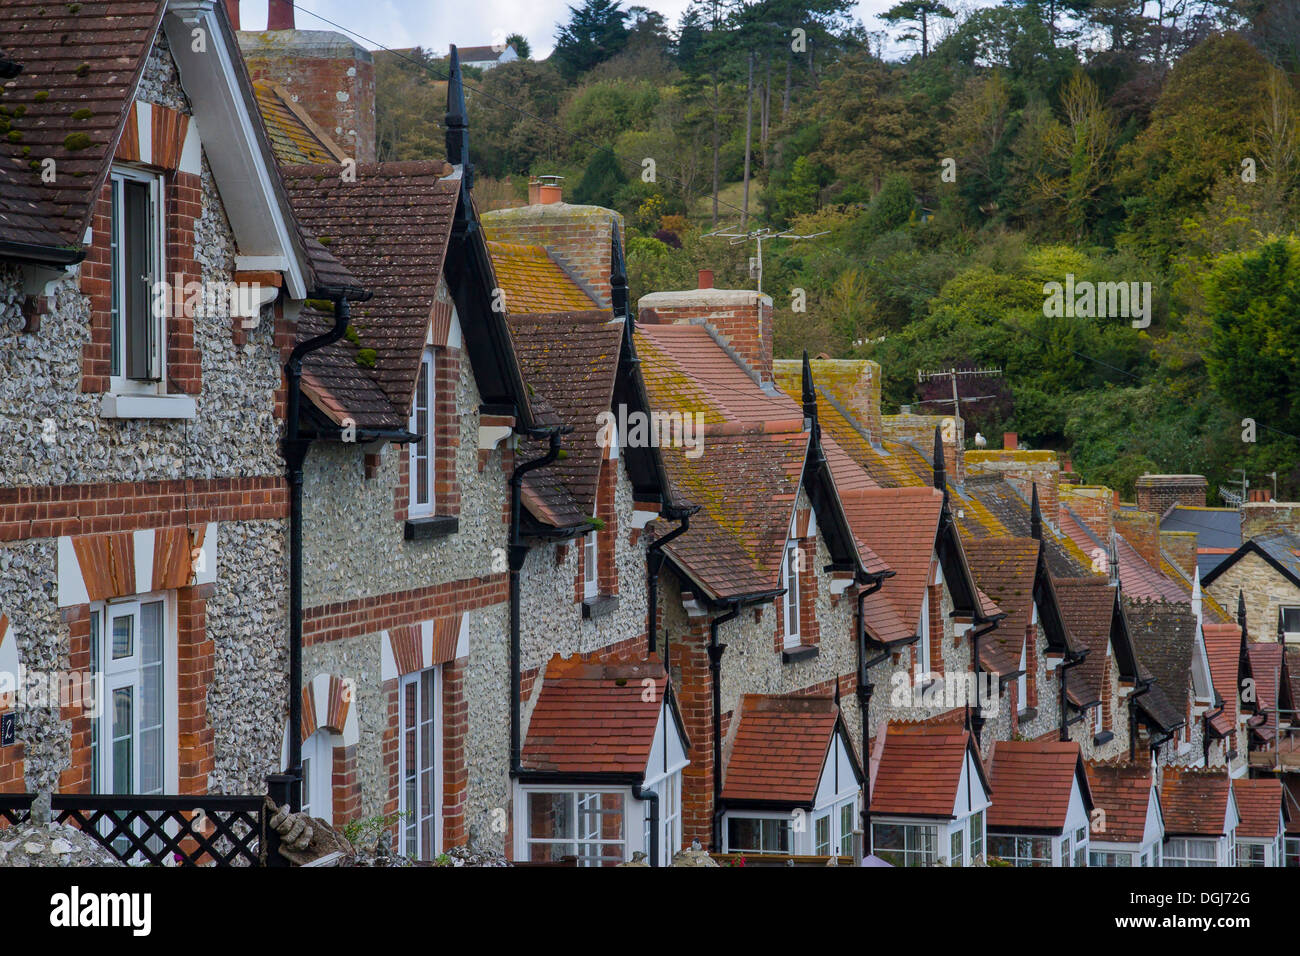 A terrace of gabled houses stepped down a steep hill. Stock Photo